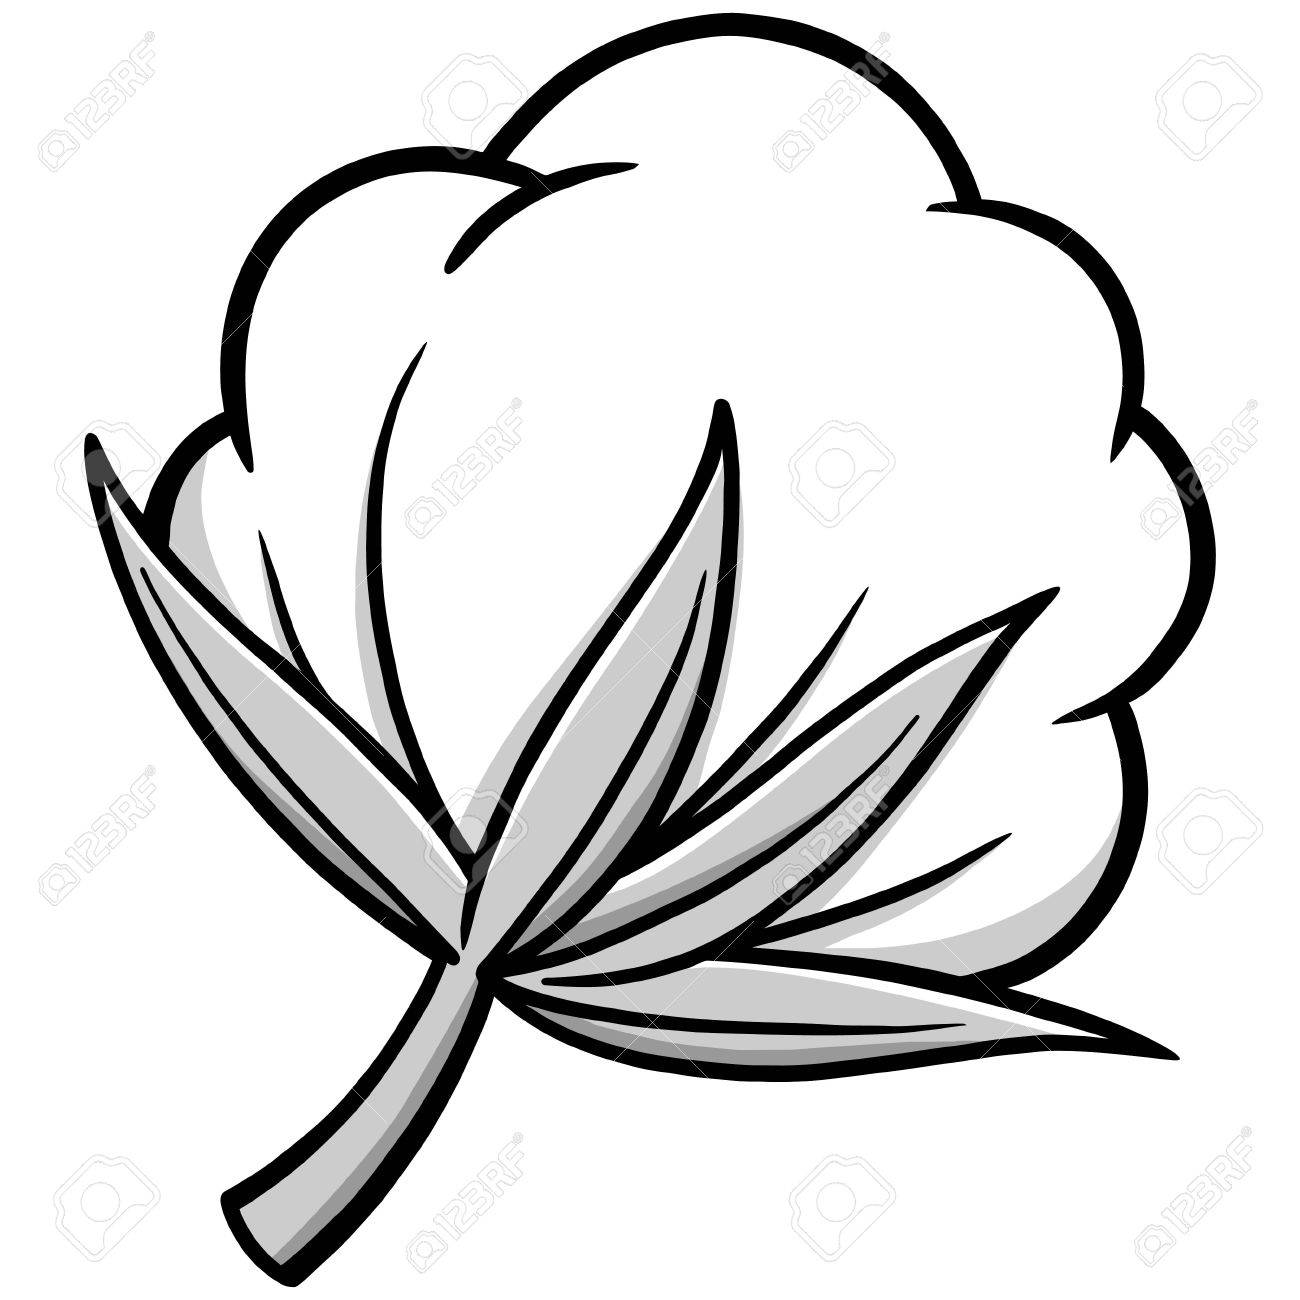 cotton clipart drawing